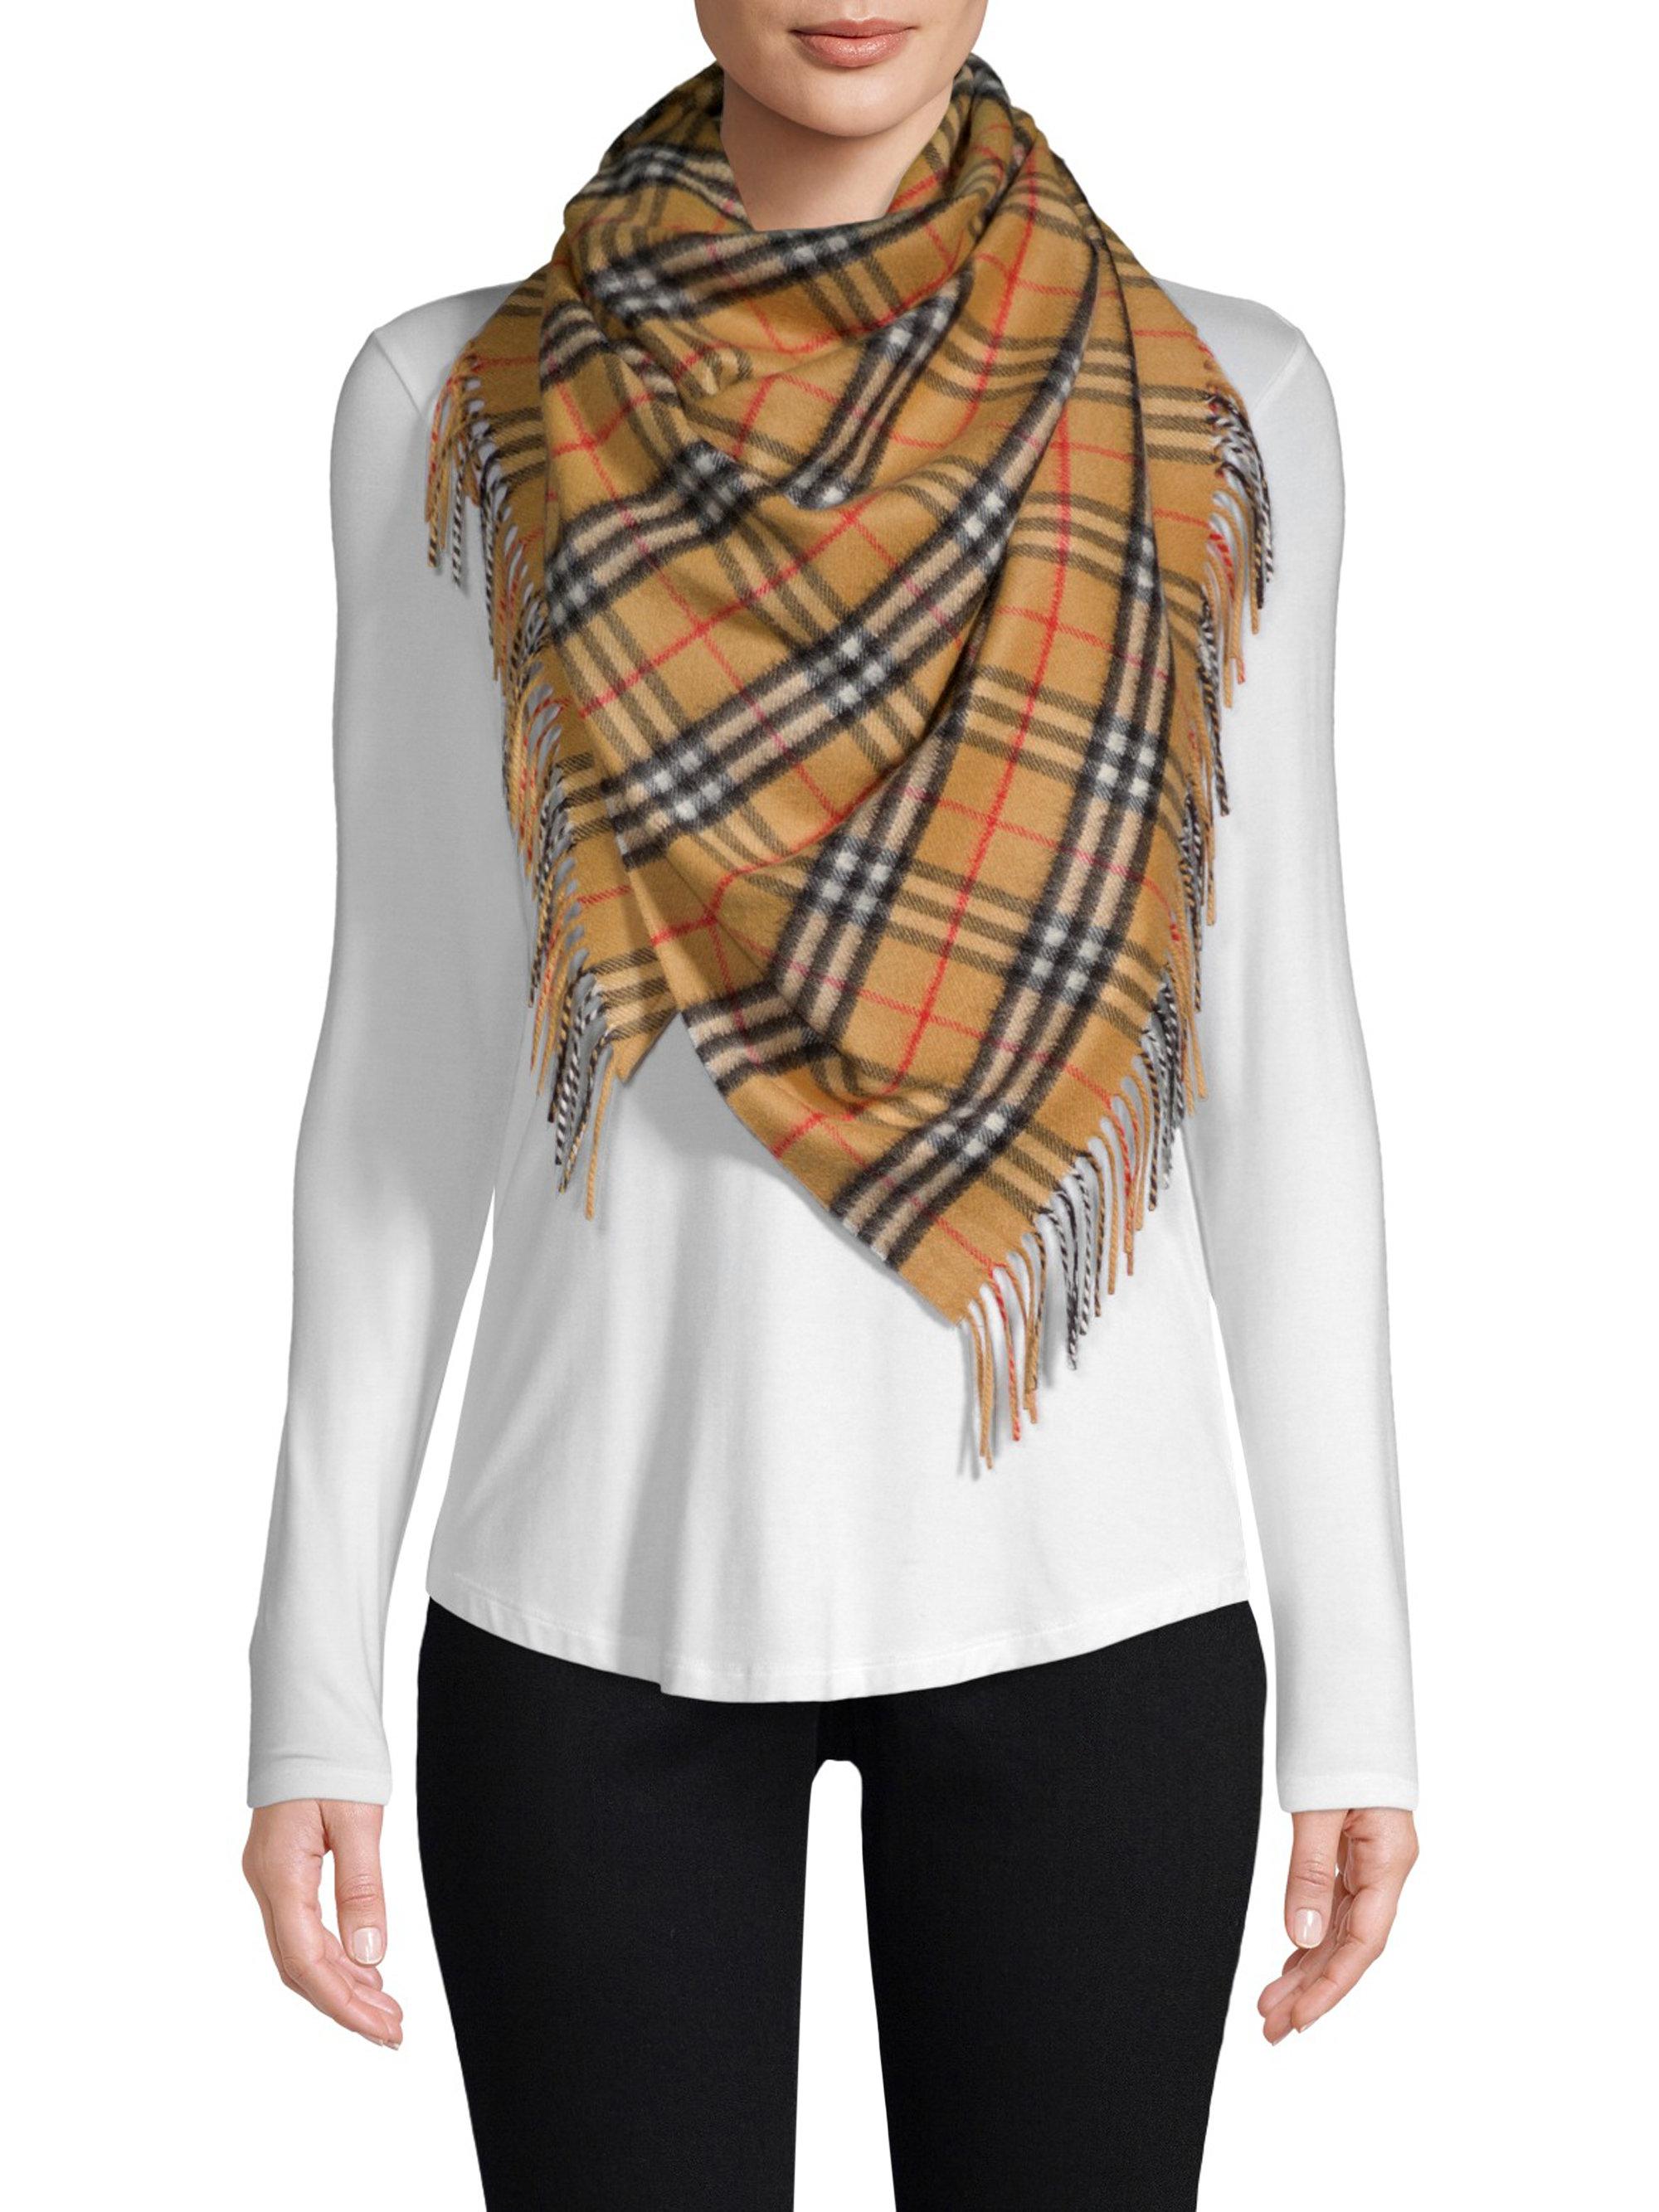 Burberry Vintage Check Cashmere Scarf - Burberry Yellow Classic Vintage ...